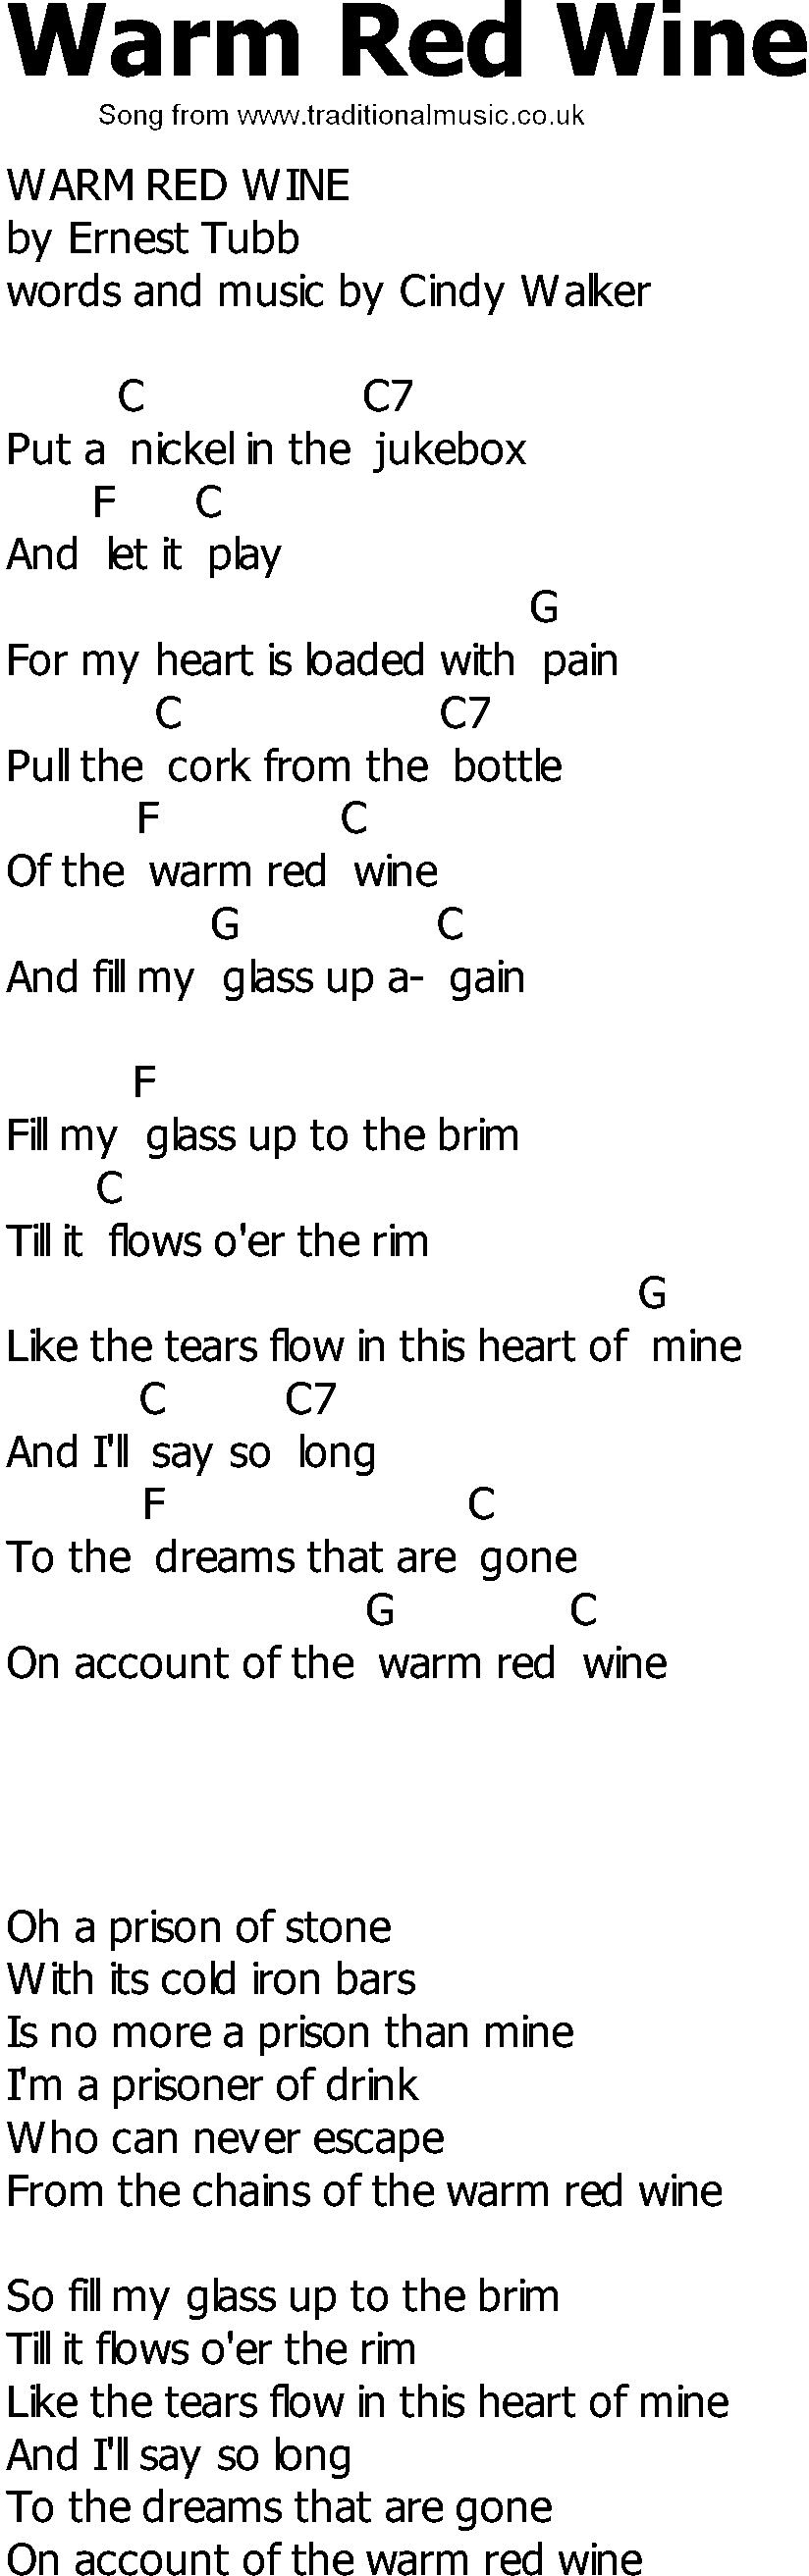 Old Country song lyrics with chords - Warm Red Wine